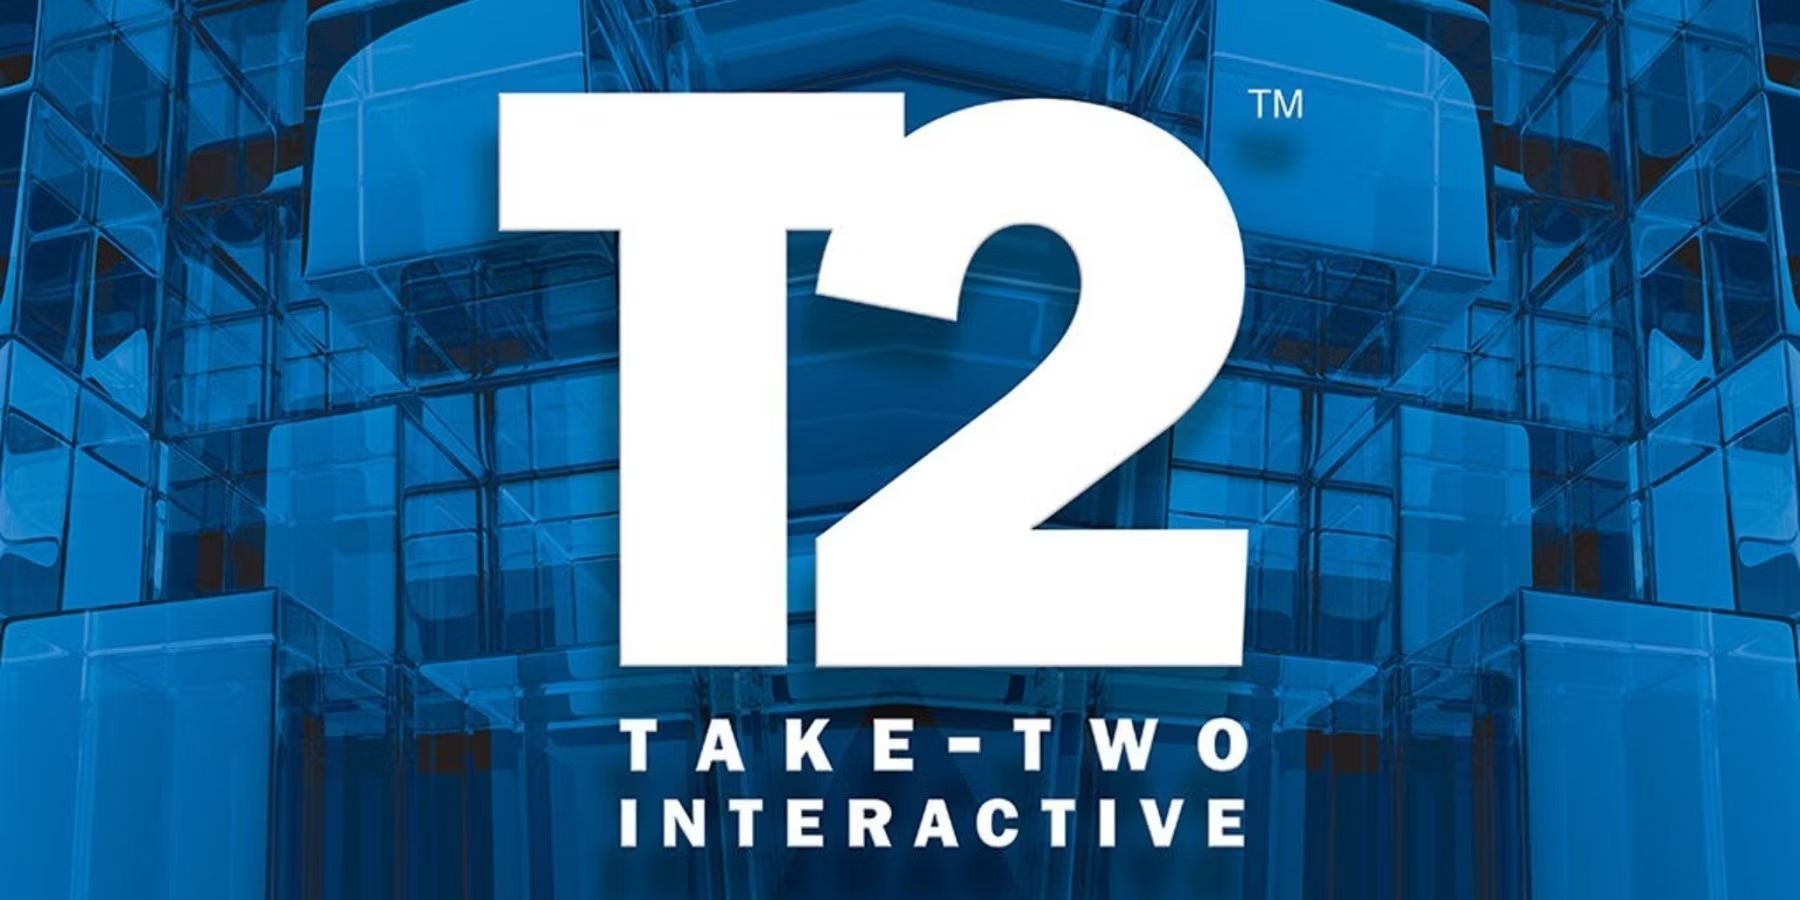 Rockstar Games Parent Company Take-Two is Reportedly Laying Off Employees